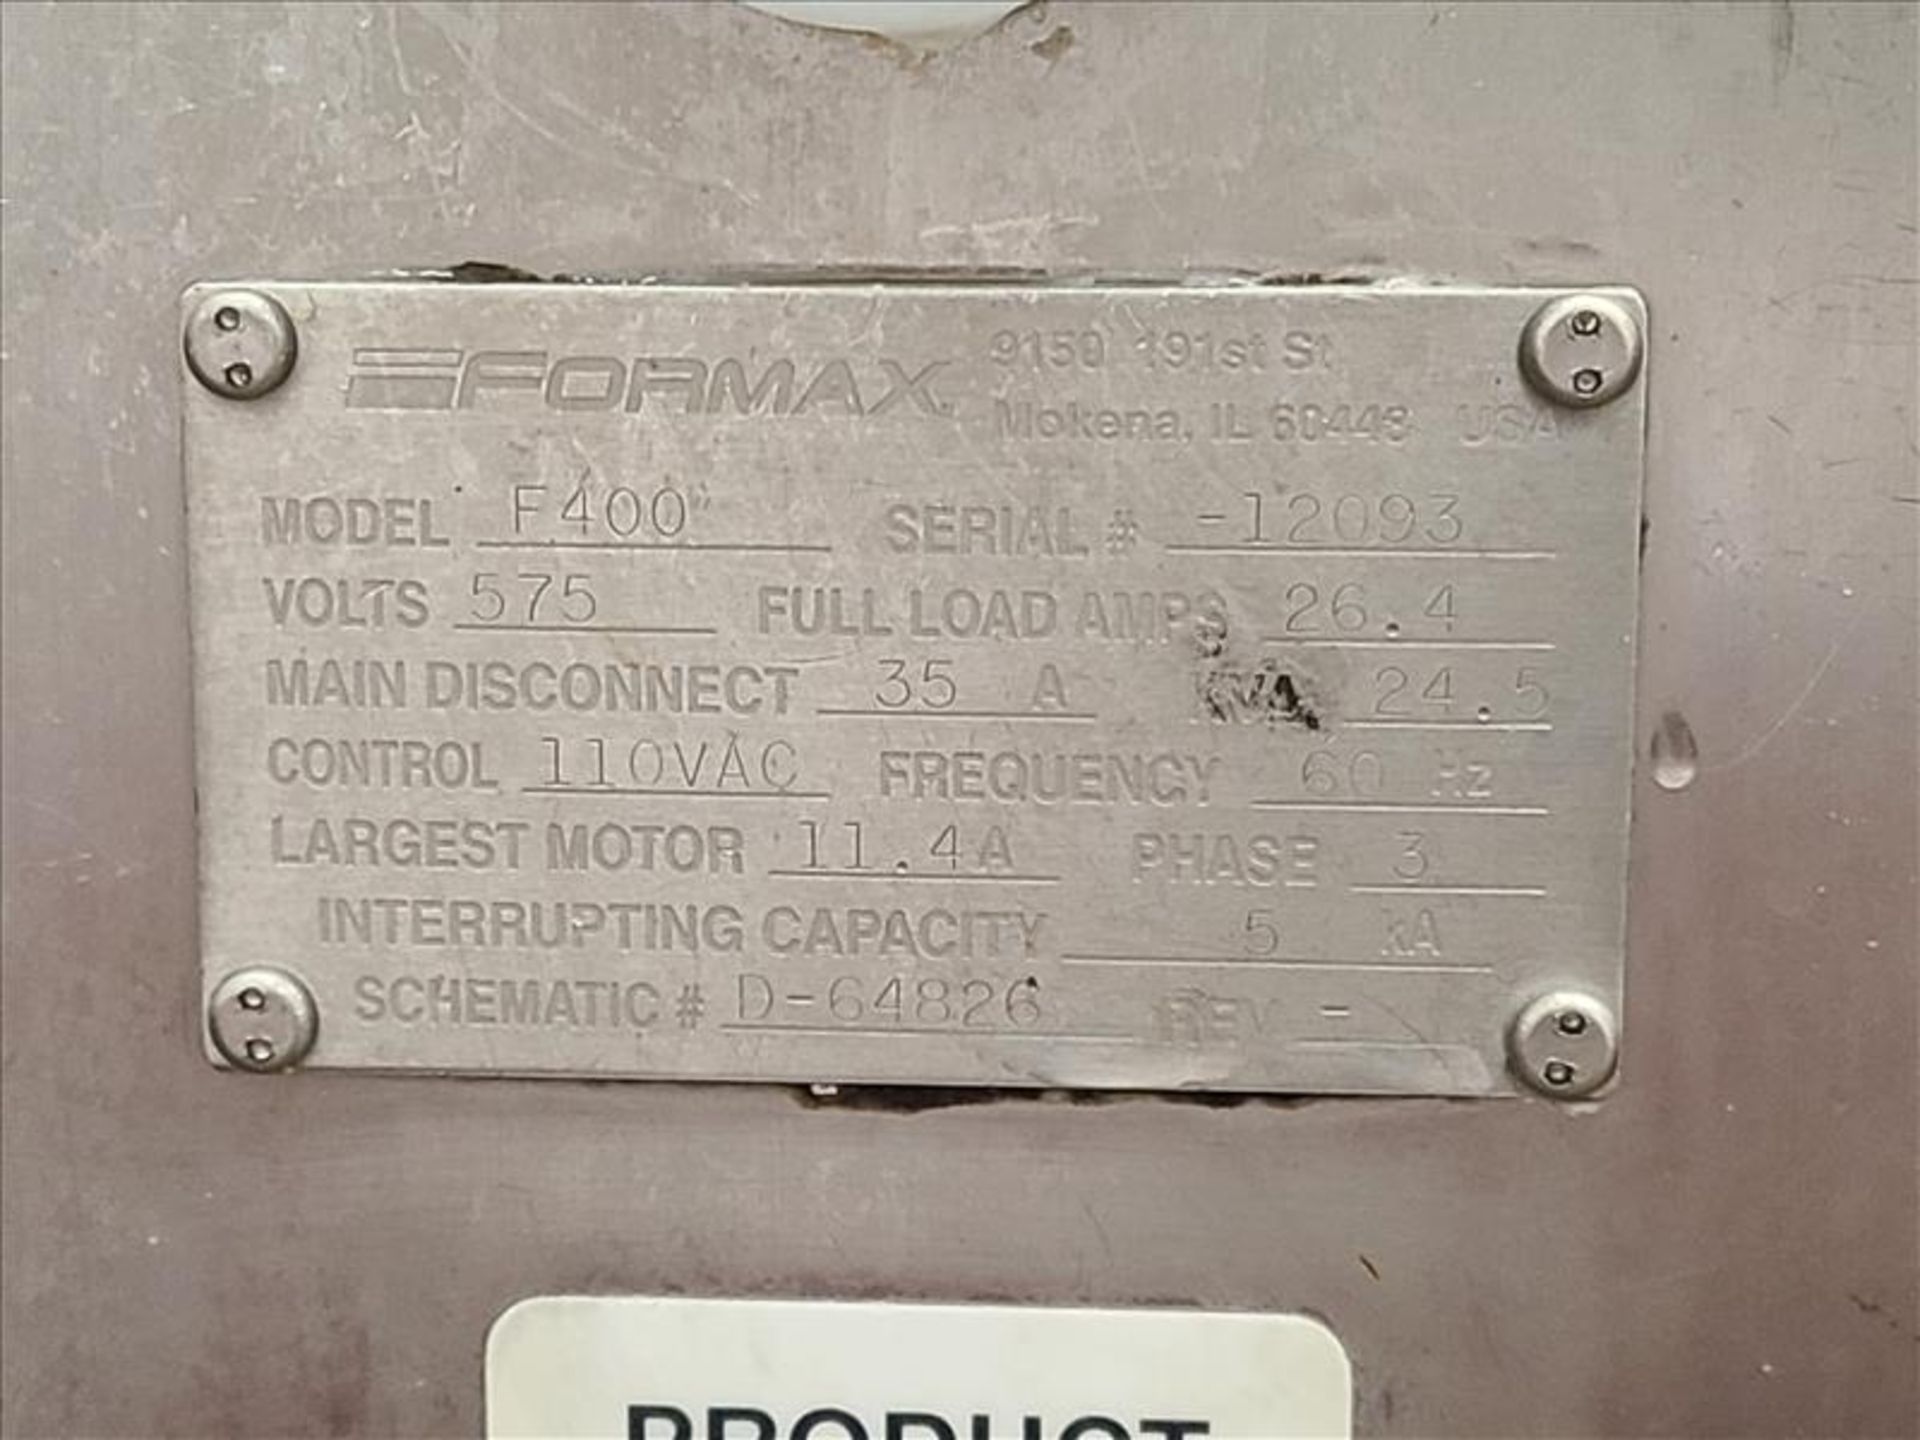 Formax Forming Machine, mod. F400, ser. no. 12093, 575 volts, 3 phase, 60 Hz [Line 3] - Image 4 of 4